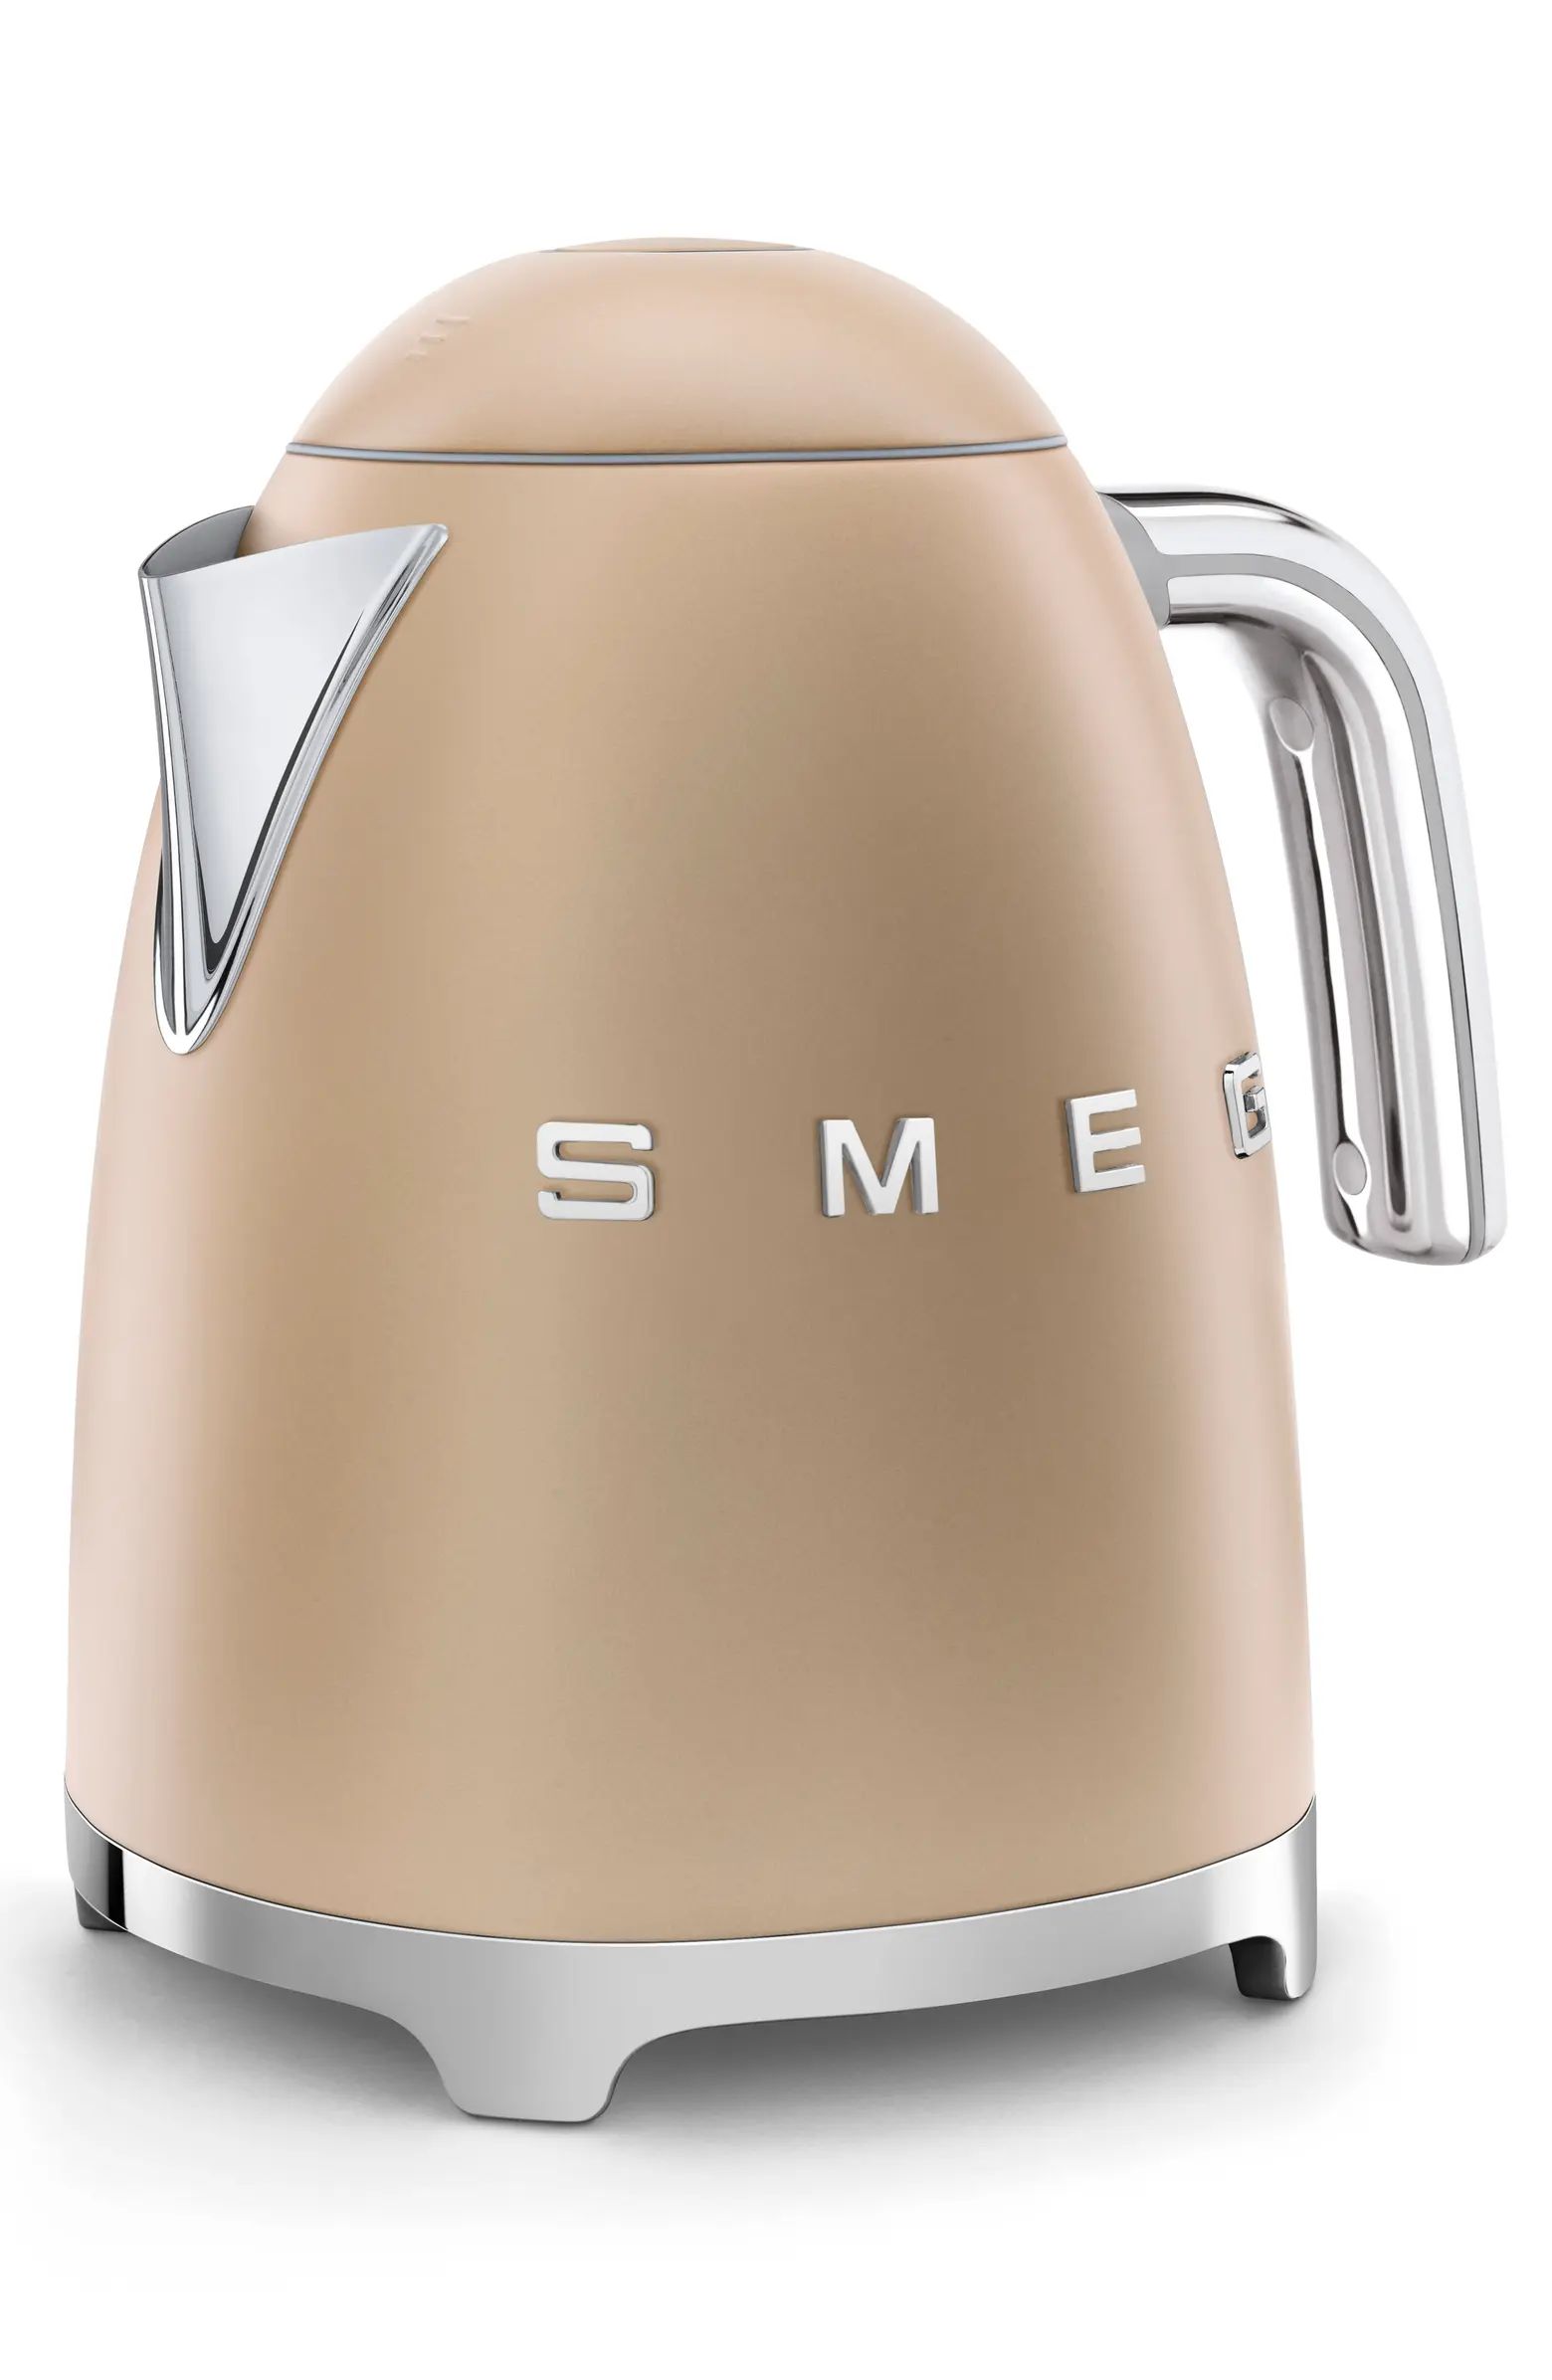 '50s Retro Style Electric Kettle | Nordstrom